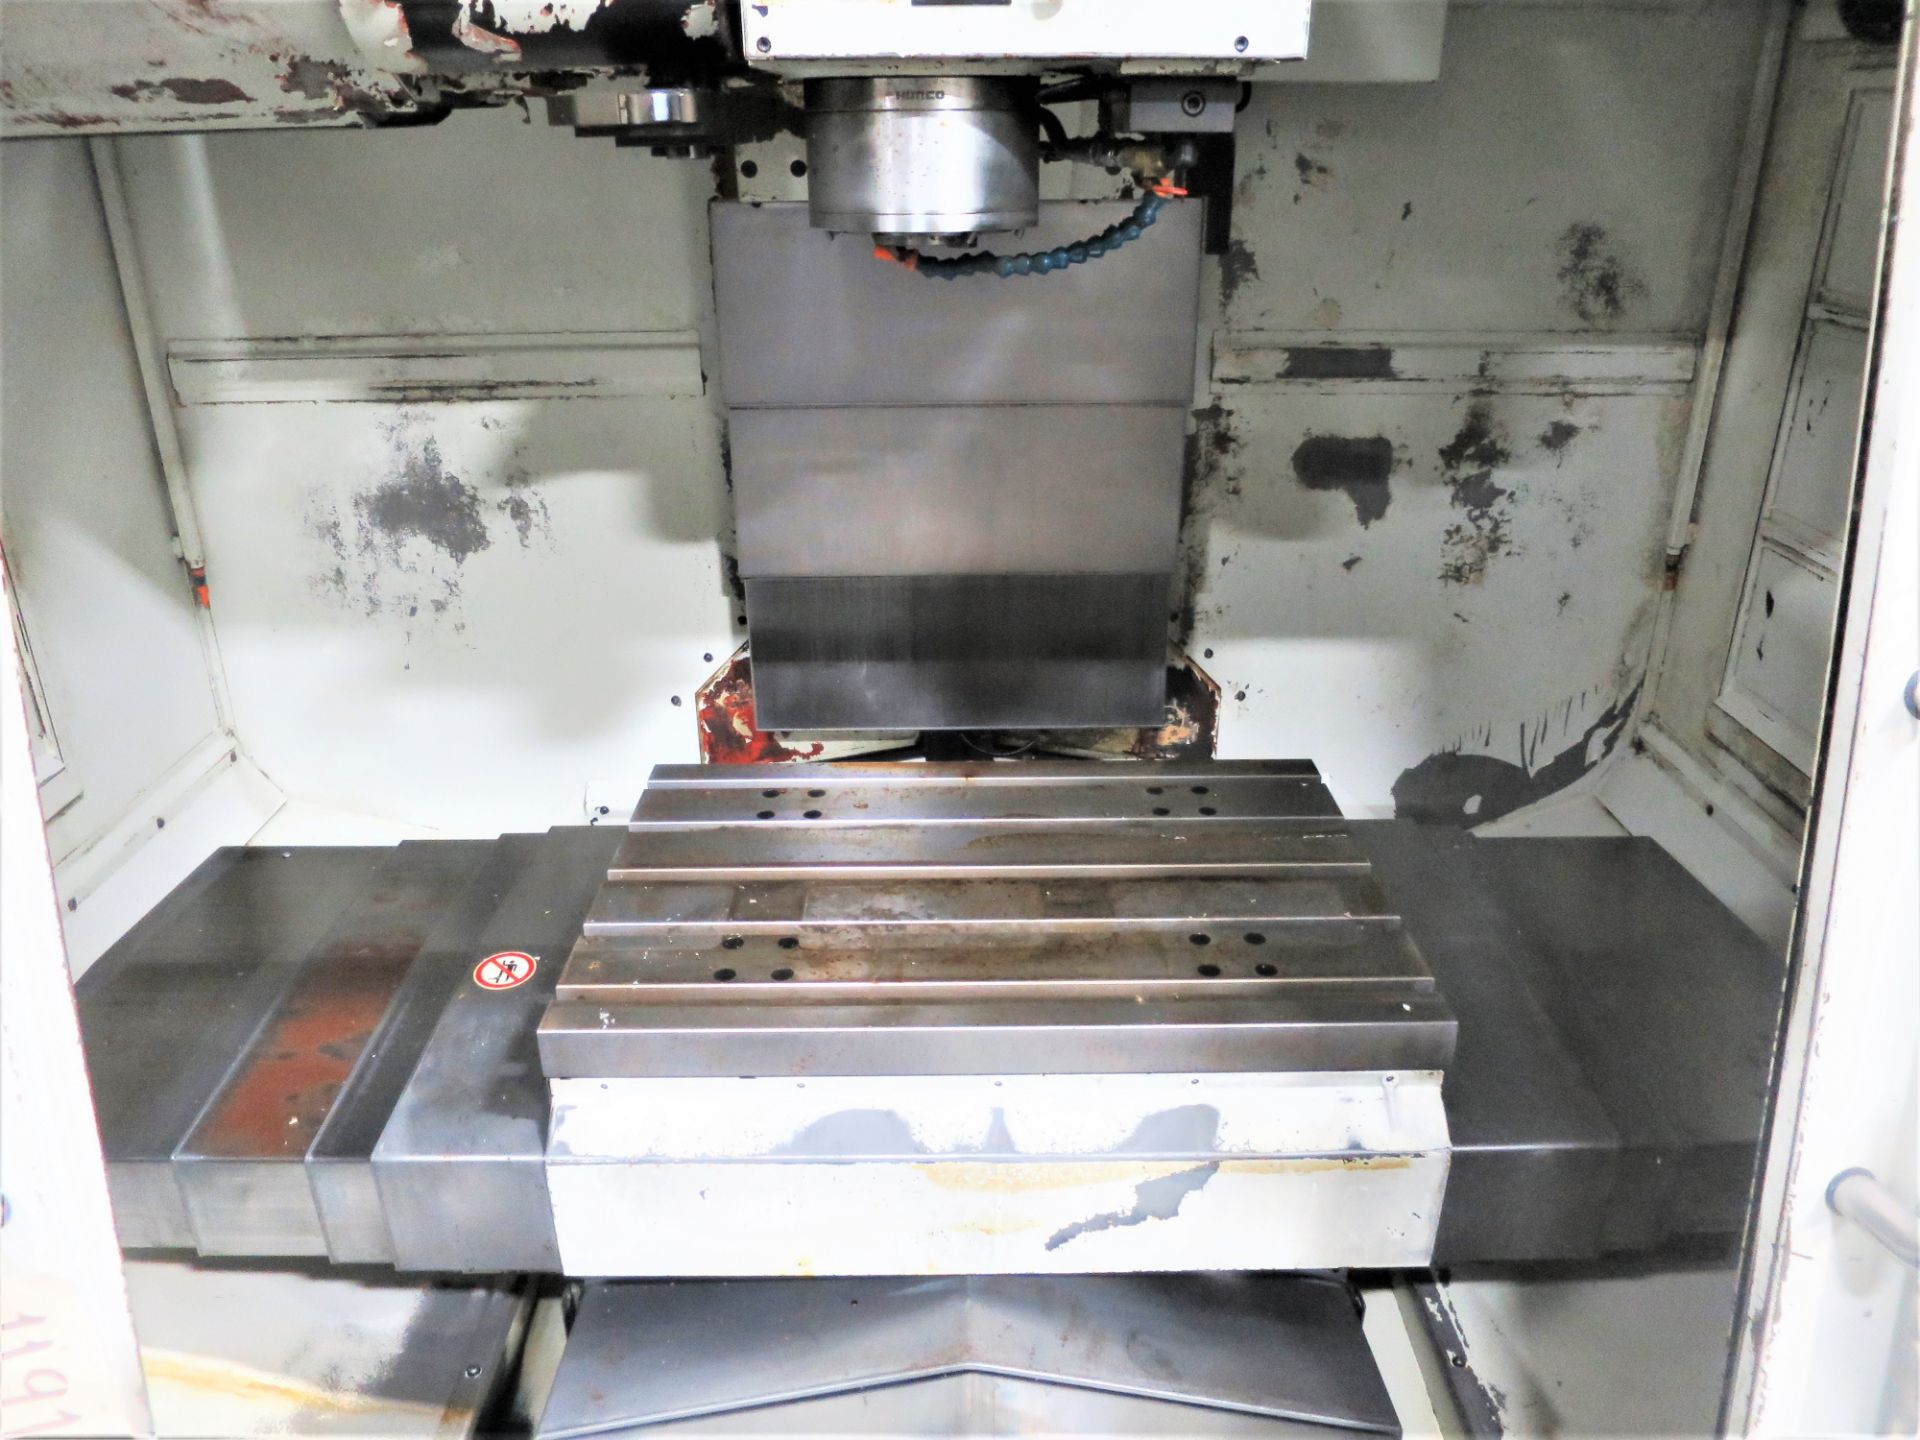 Hurco VMX-24 3-Axis CNC Vertical Machining Center, S/N M242-06019, New 2007 - Image 3 of 6